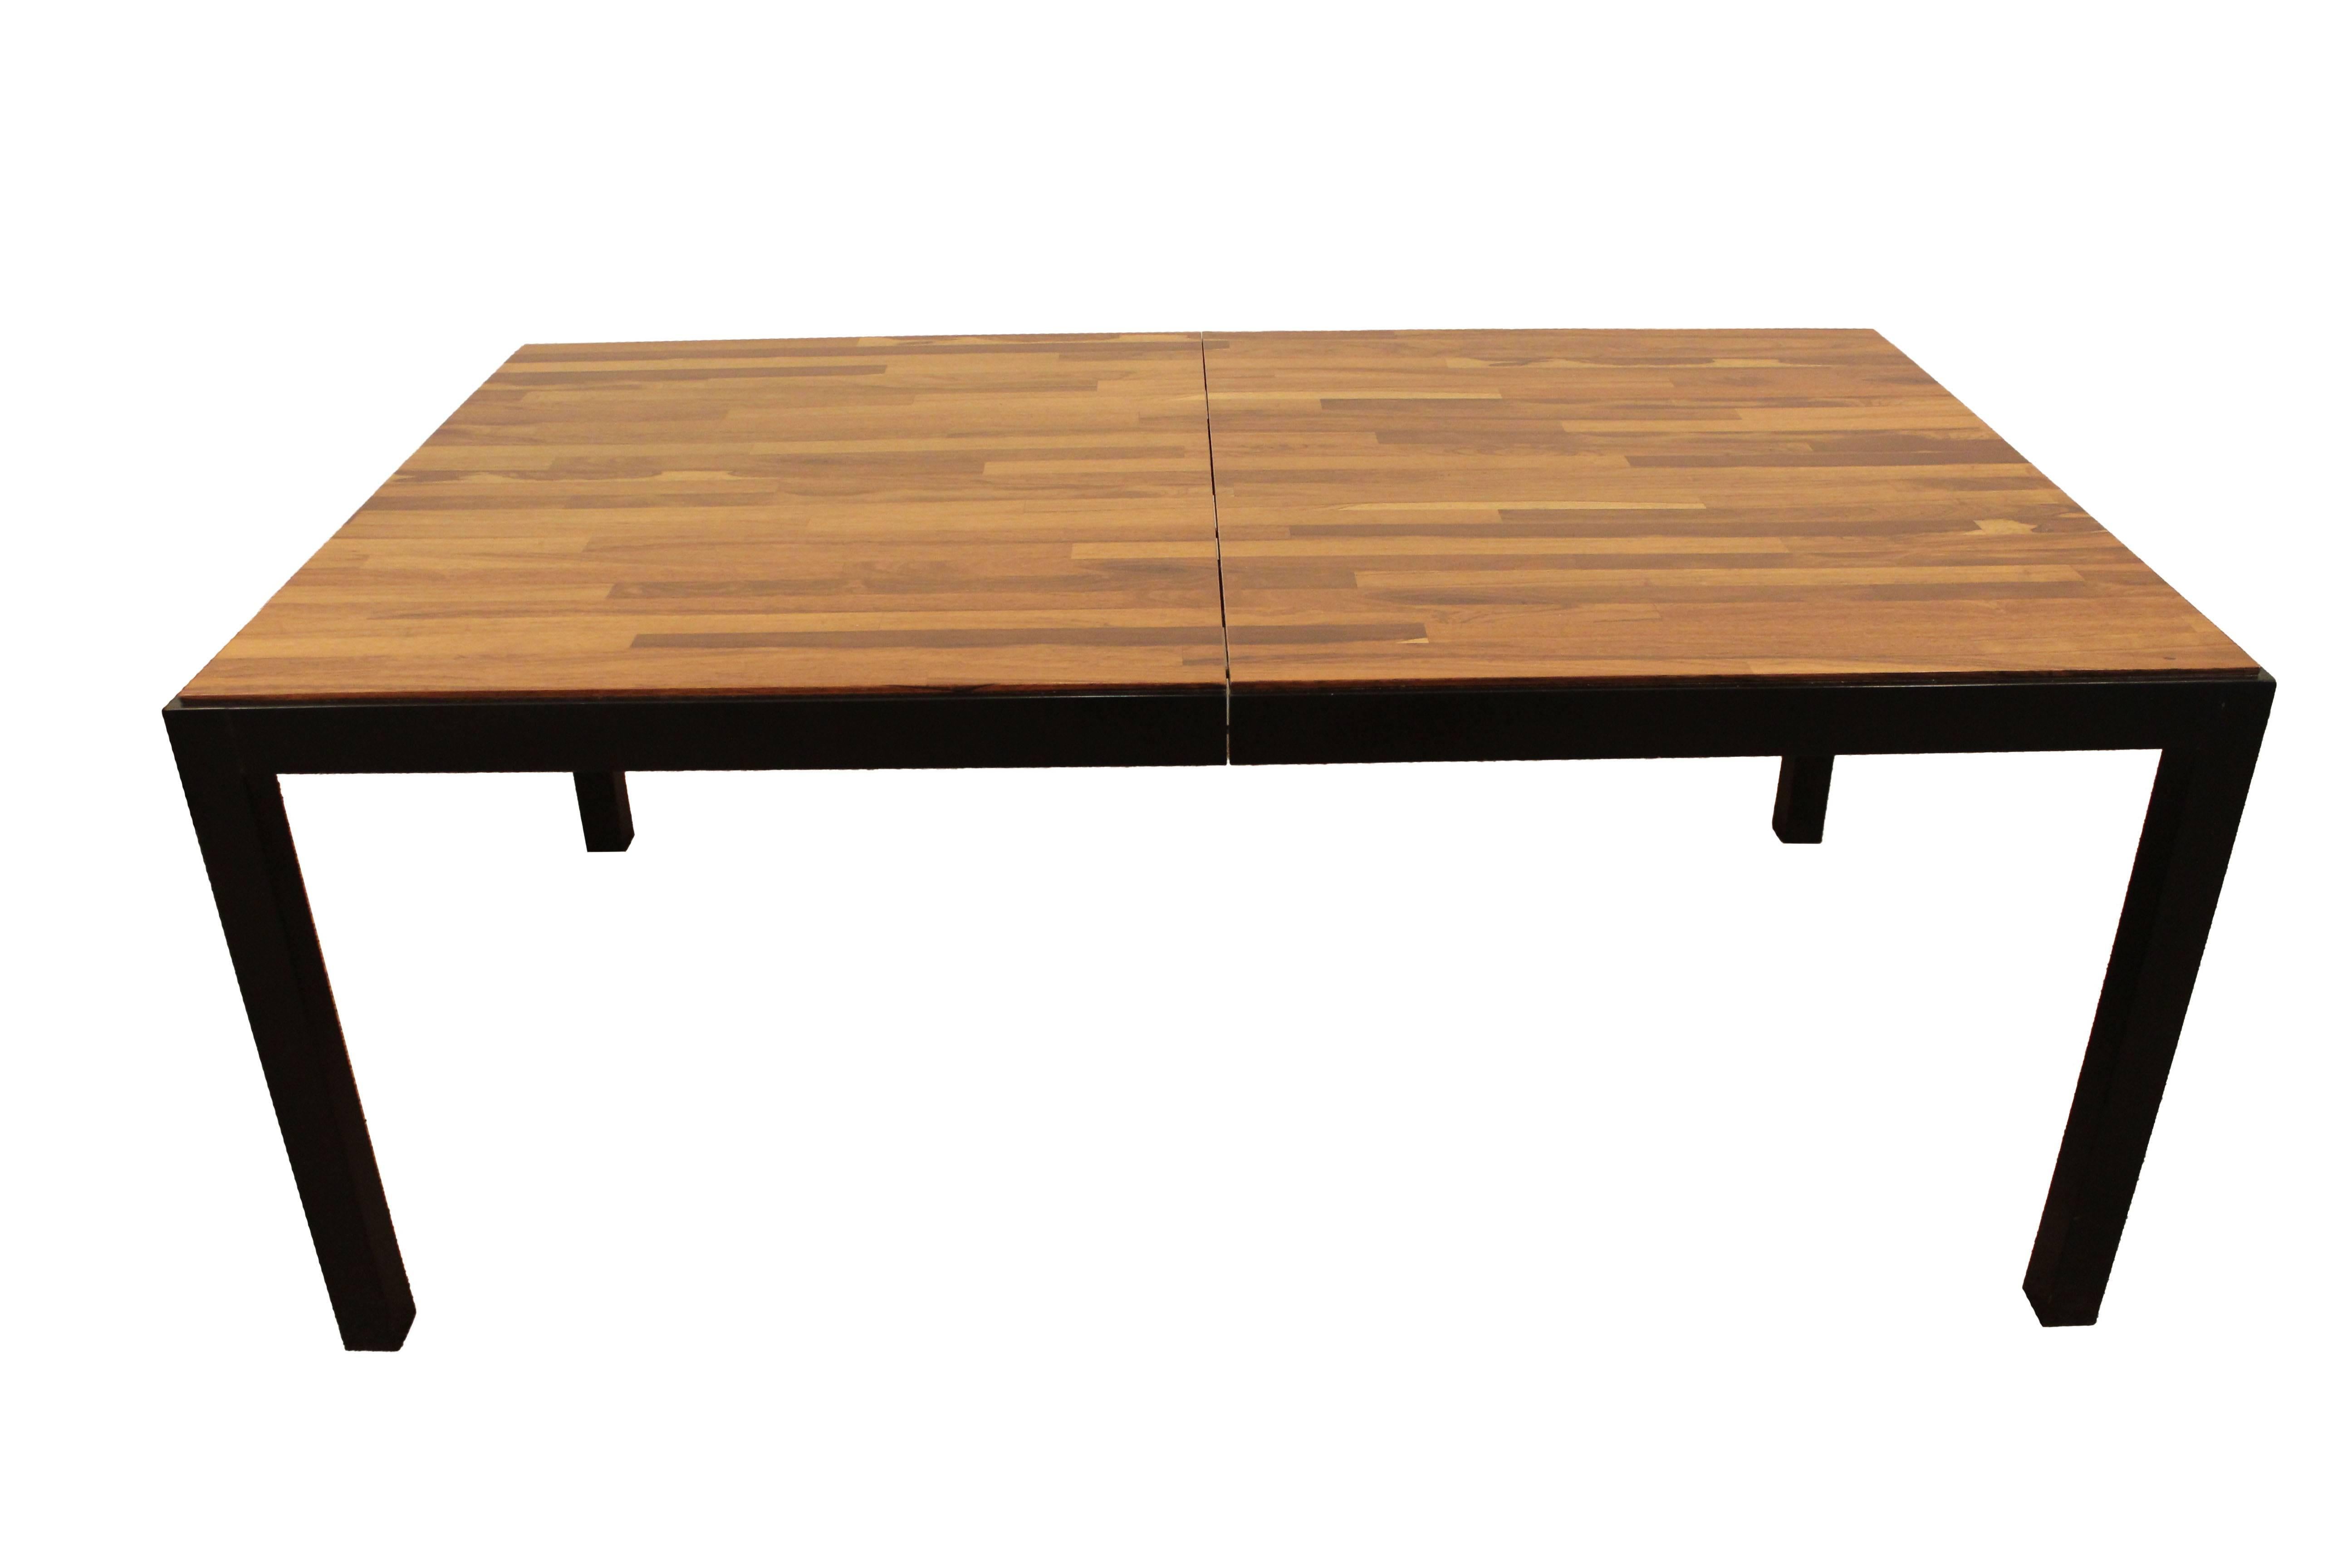 This table was designed by Milo Baughman for Directional. It has a parqueted top with mixed woods and ebonized legs. Includes two extension boards. It was designed by Milo Baughman for Directional.

Dimensions: 
Without extensions 68